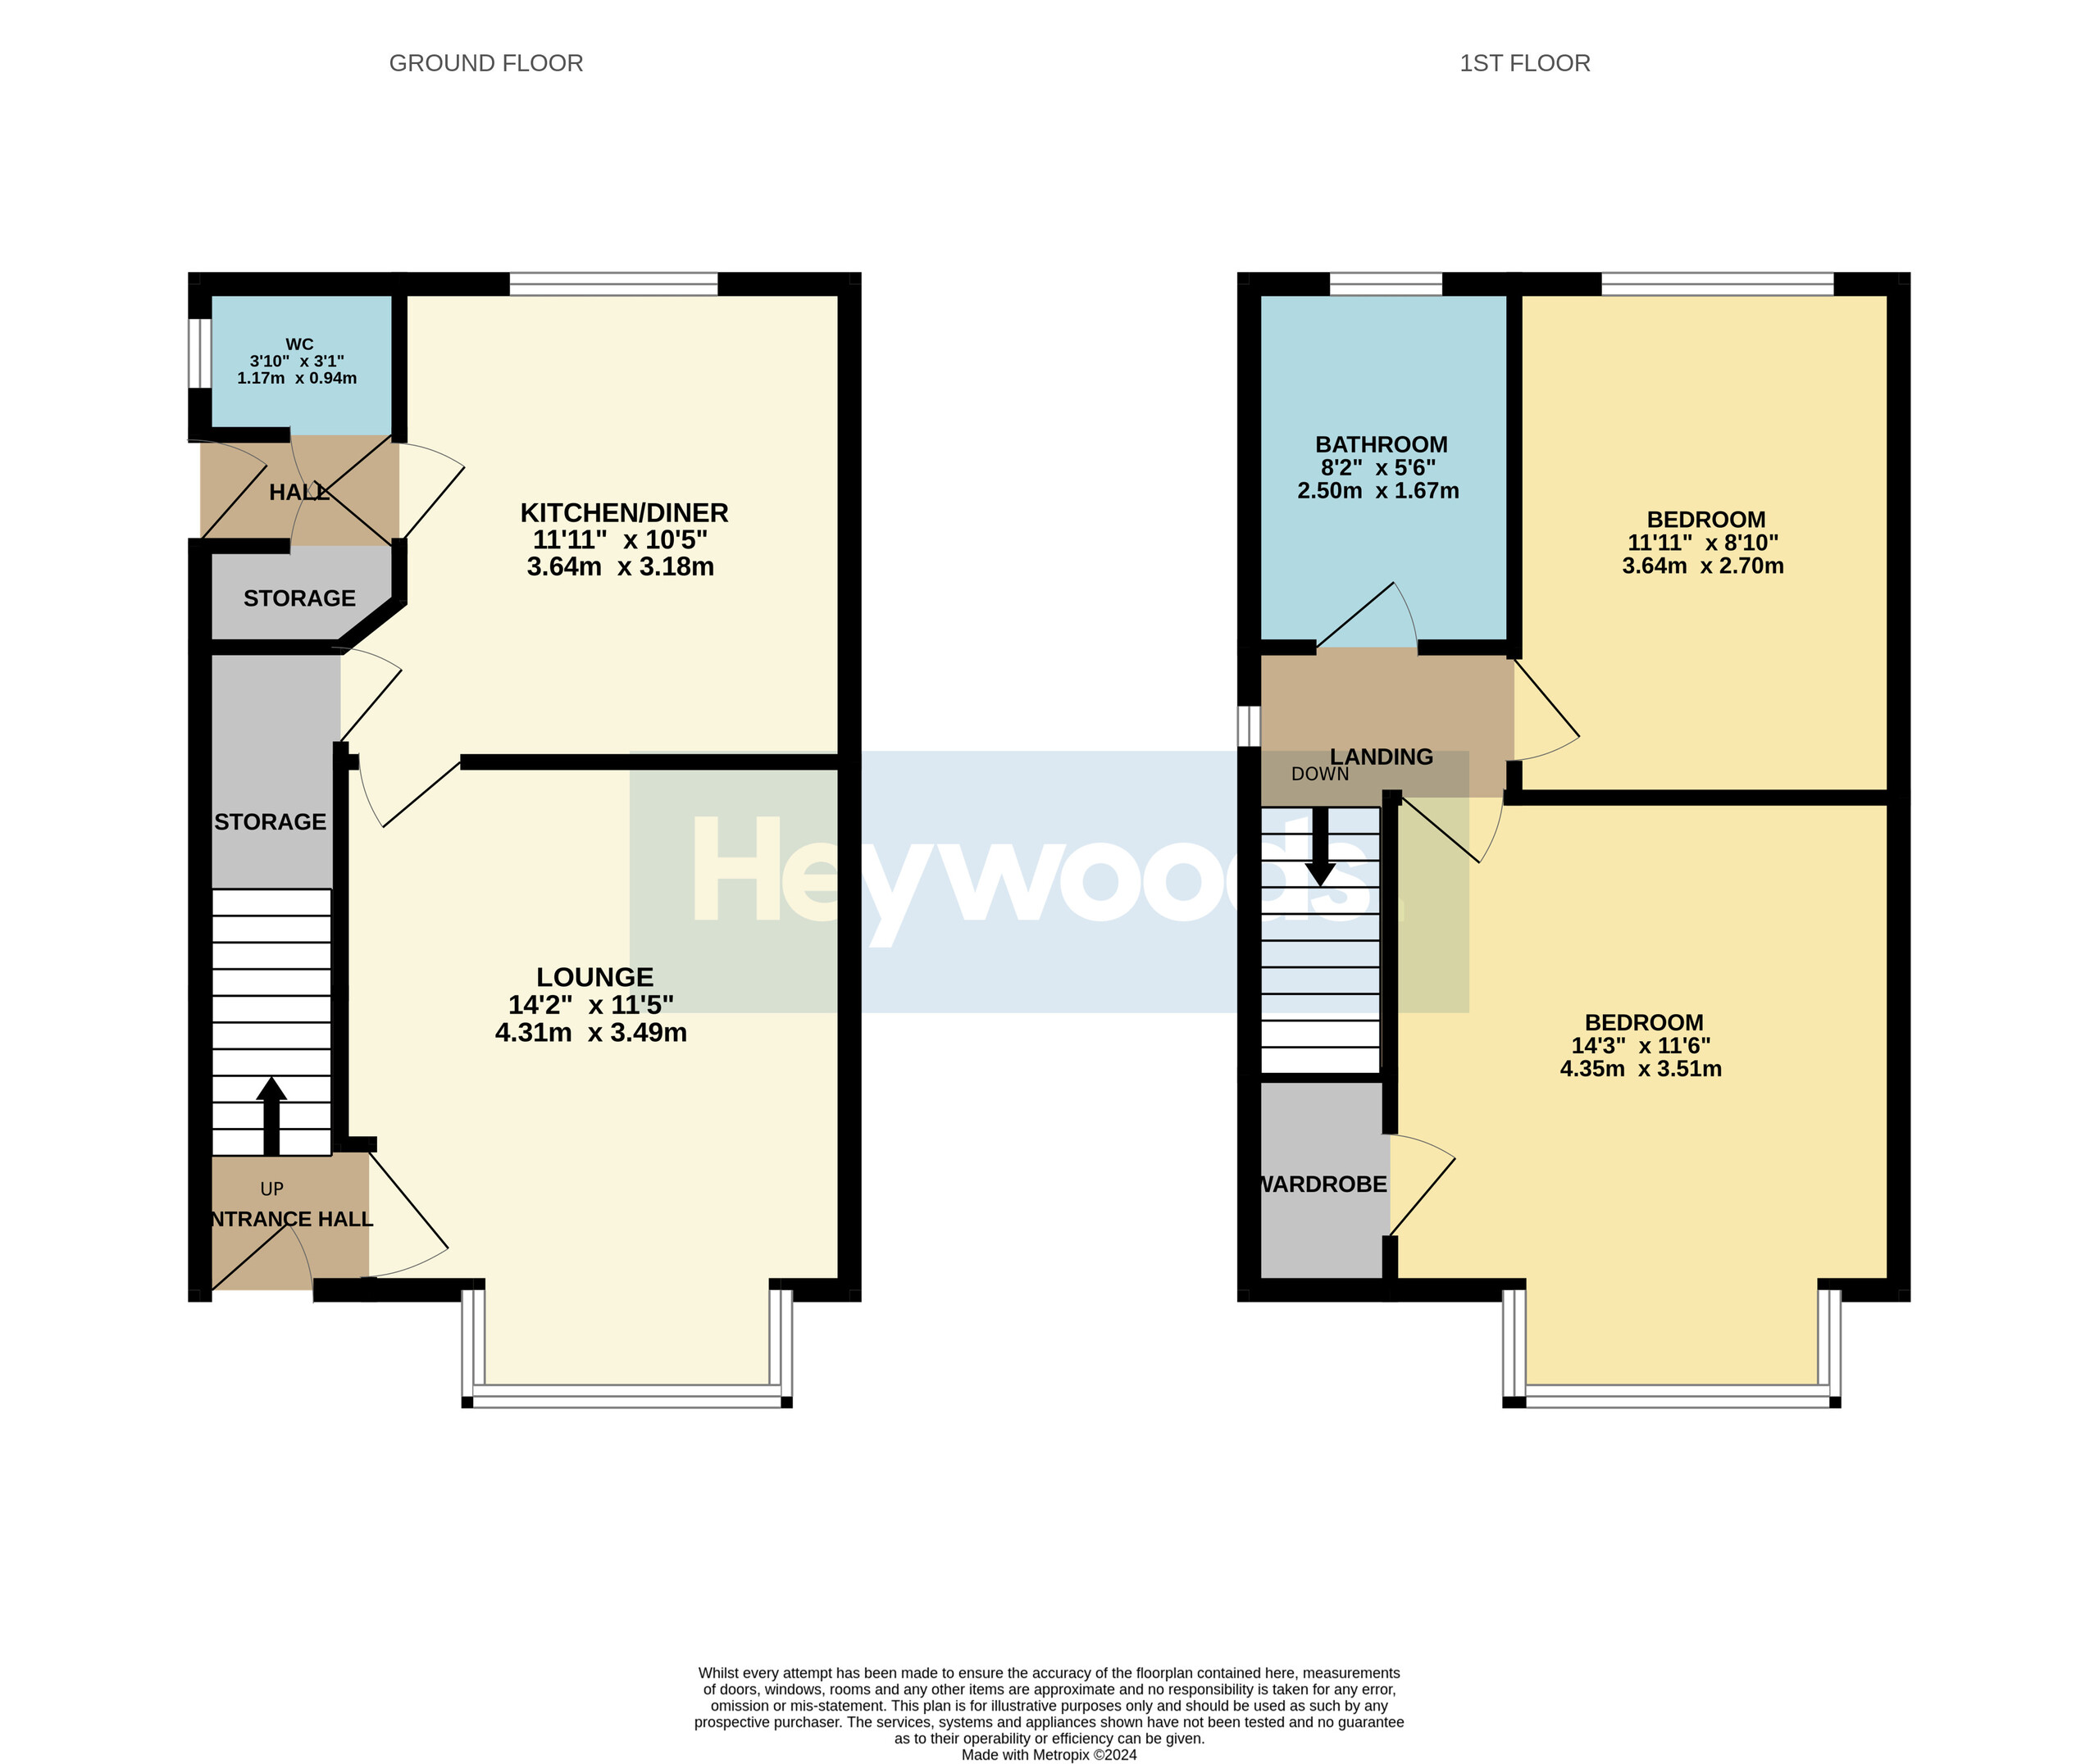 2 bed semi-detached house for sale in Blurton, Stoke-on-Trent - Property floorplan